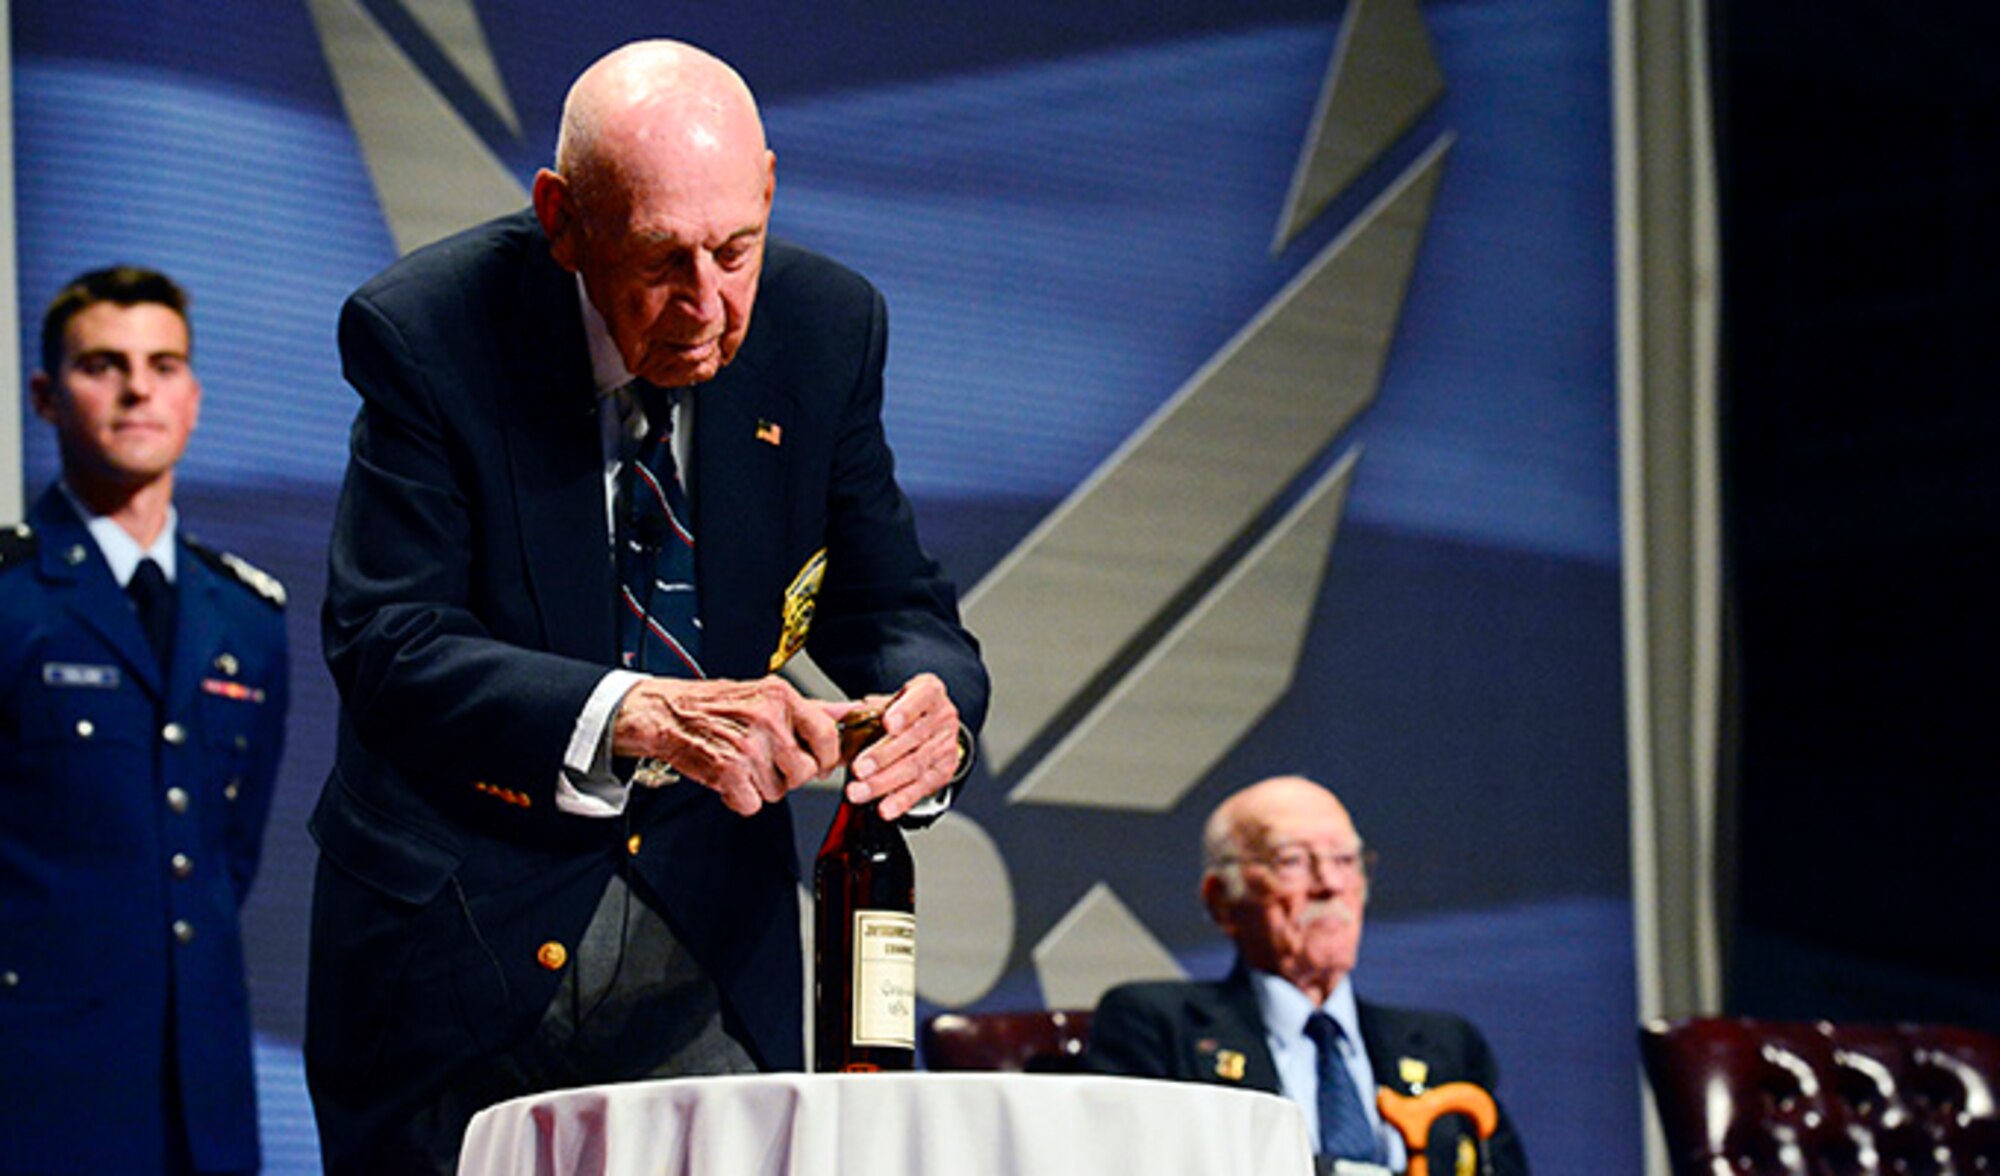 Retired Lt. Col. Richard “Dick” E. Cole opens the 1896 bottle of cognac before The Doolittle Tokyo Raiders shared their last and final toast at the National Museum of the U.S. Air Force Nov. 09, 2013 in Dayton, Ohio. Cole was the copilot of Aircraft No. 1. 